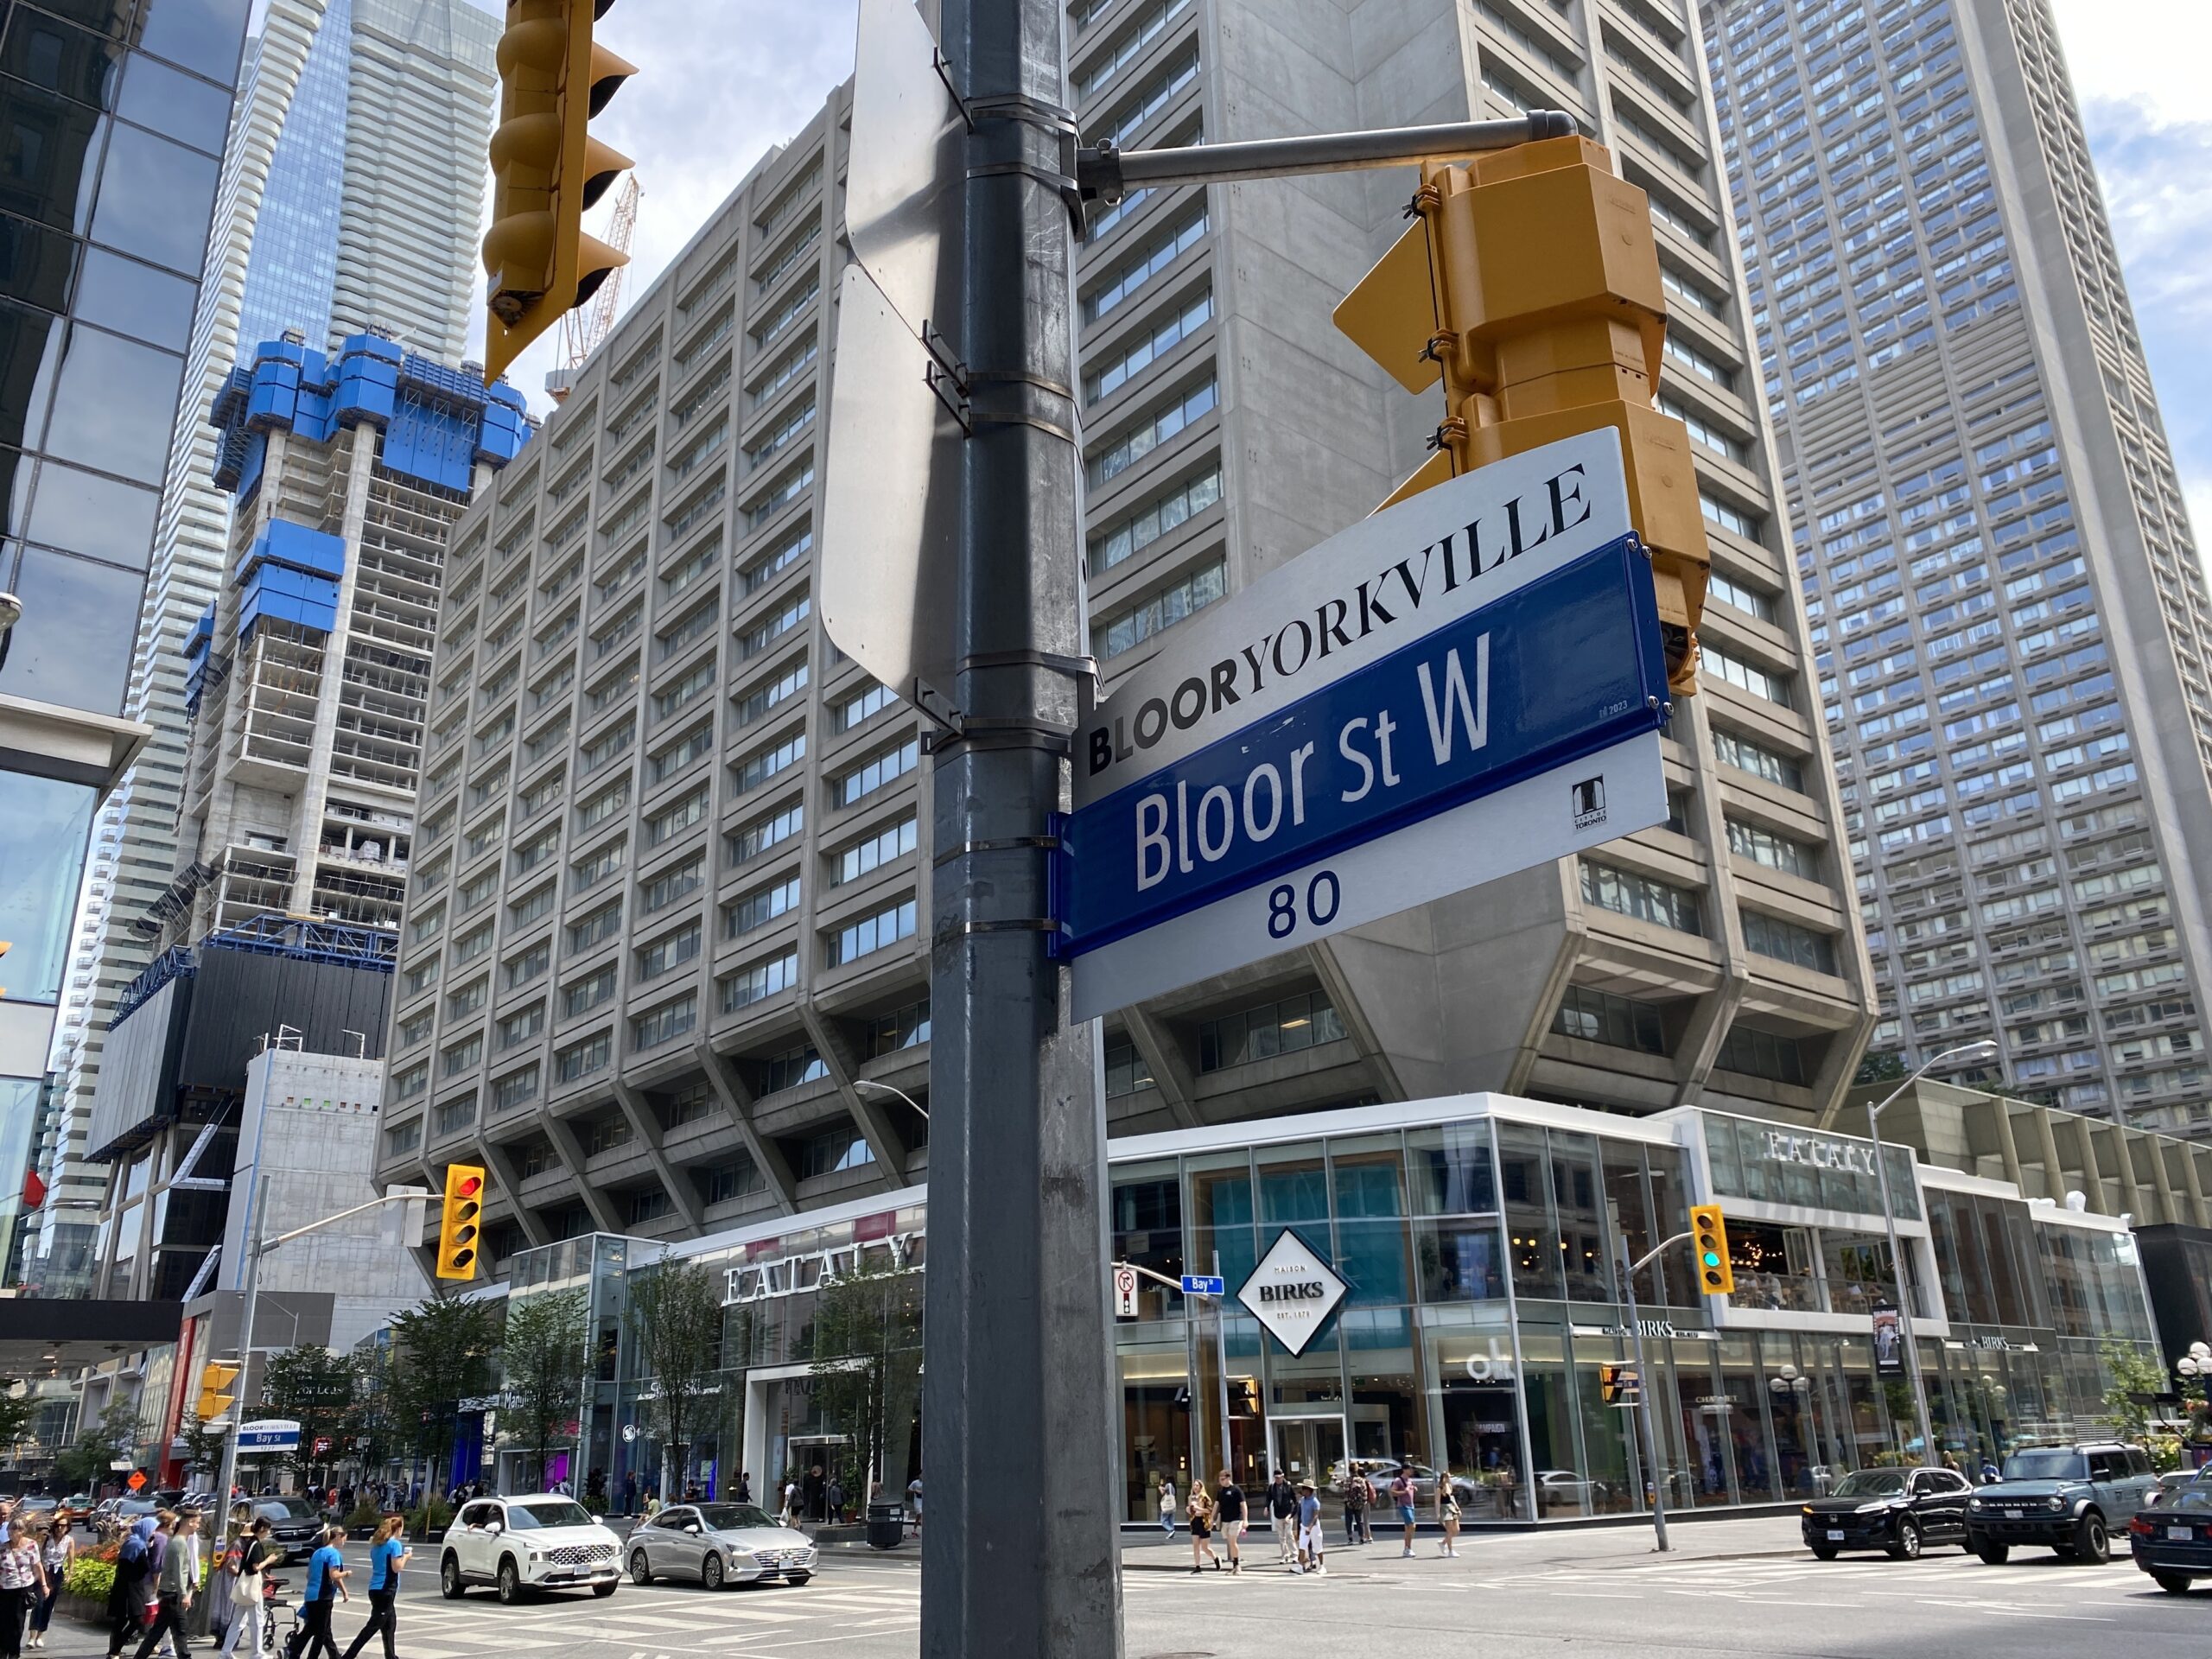 What's Happening in Bloor-Yorkville, Exit of Nordstrom from Canada and the  Future of Luxury Retail: Interview with Ashkan Yousofpour